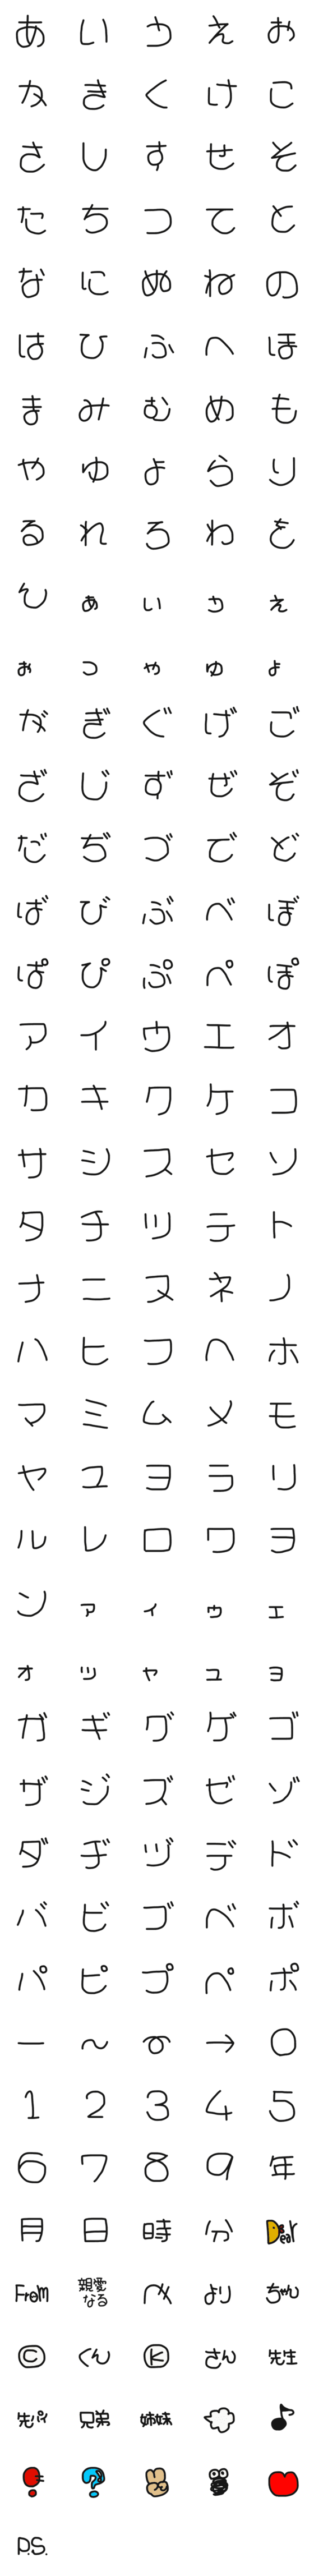 [LINE絵文字]青春文字の画像一覧